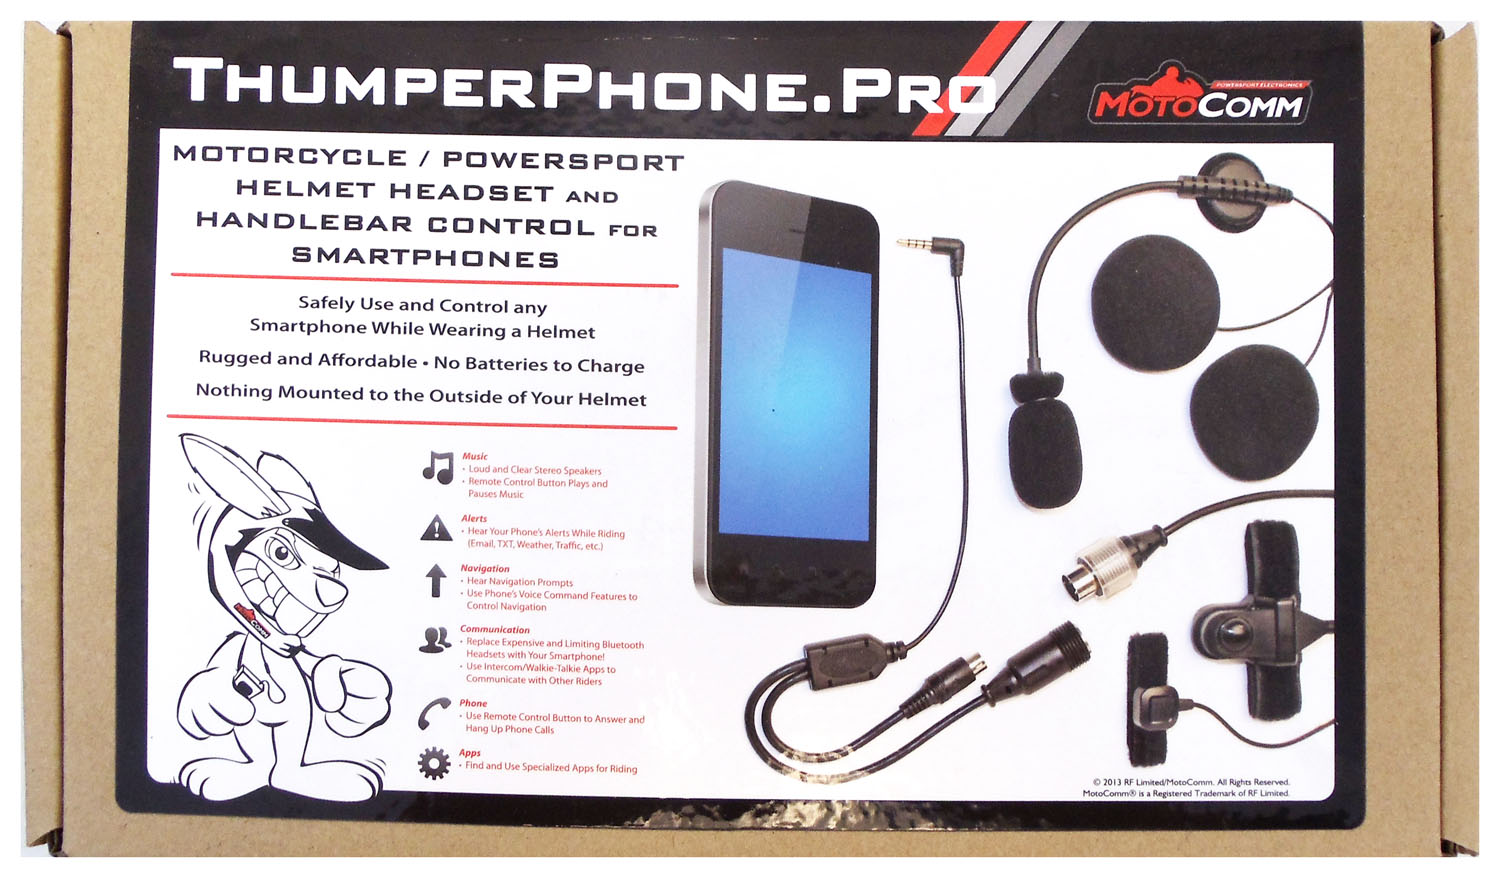 Molocomm - Motorcycle/Powersport Helmet Headset & Handlebar Control For Smartphones Enables Rider To Communicate Safely